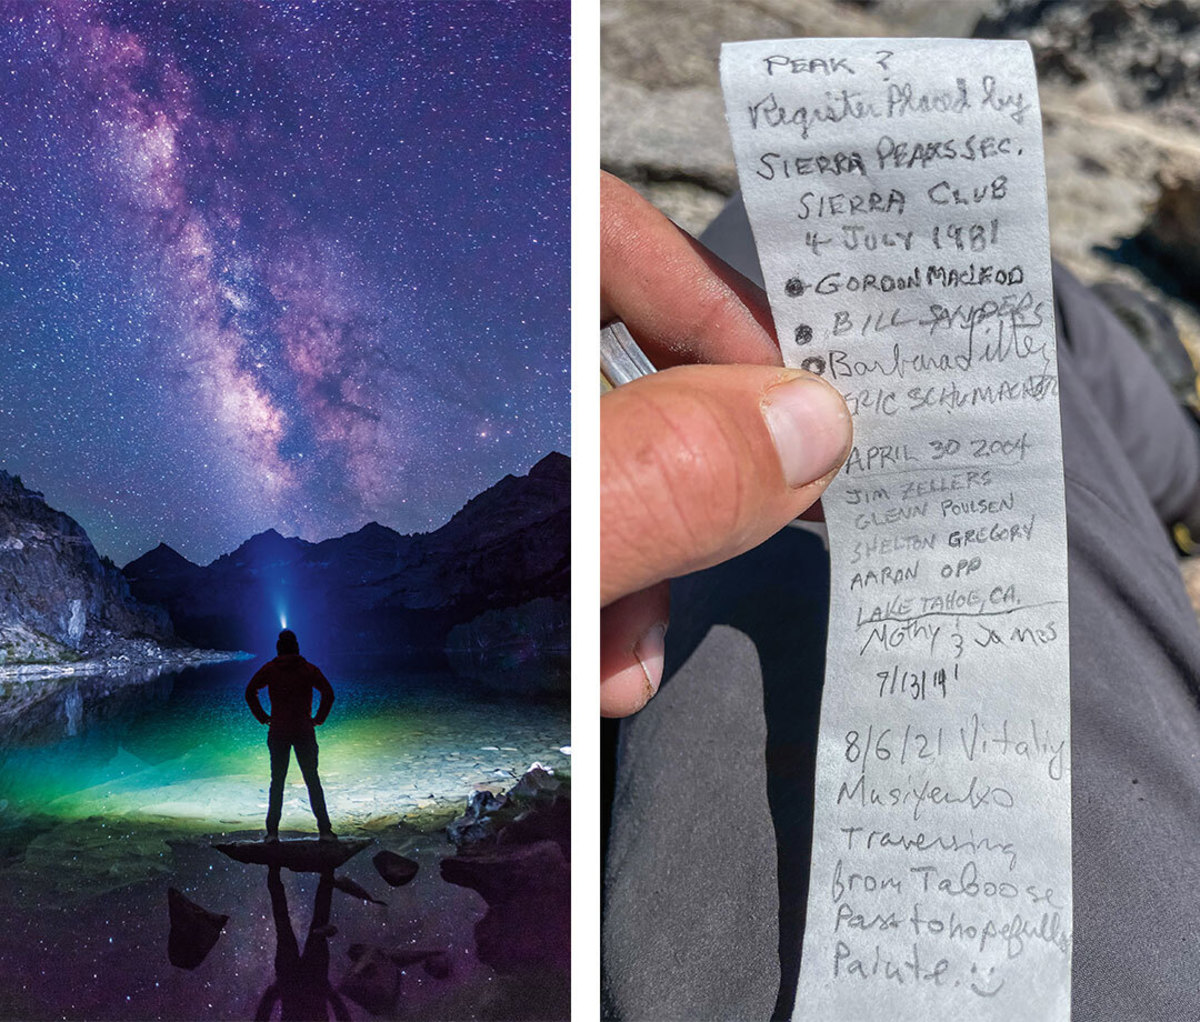 Left photo depicts adventurer at night wearing headlamp looking up at constellations. Photo right depicts names written on thin piece of paper